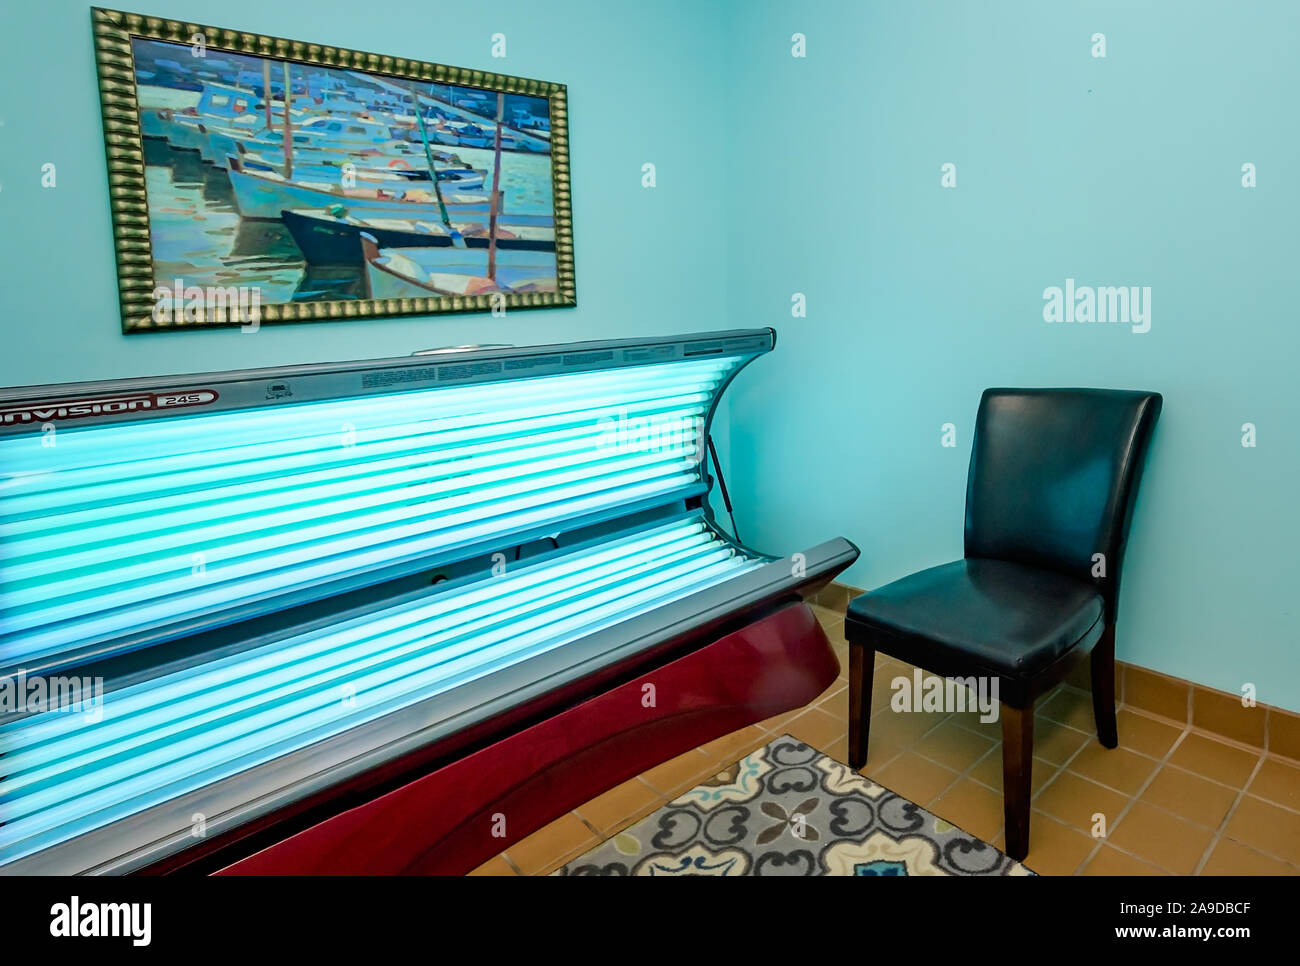 A tanning bed is one of the amenities offered at Cypress Cove Apartment Homes in Mobile, Alabama. Stock Photo